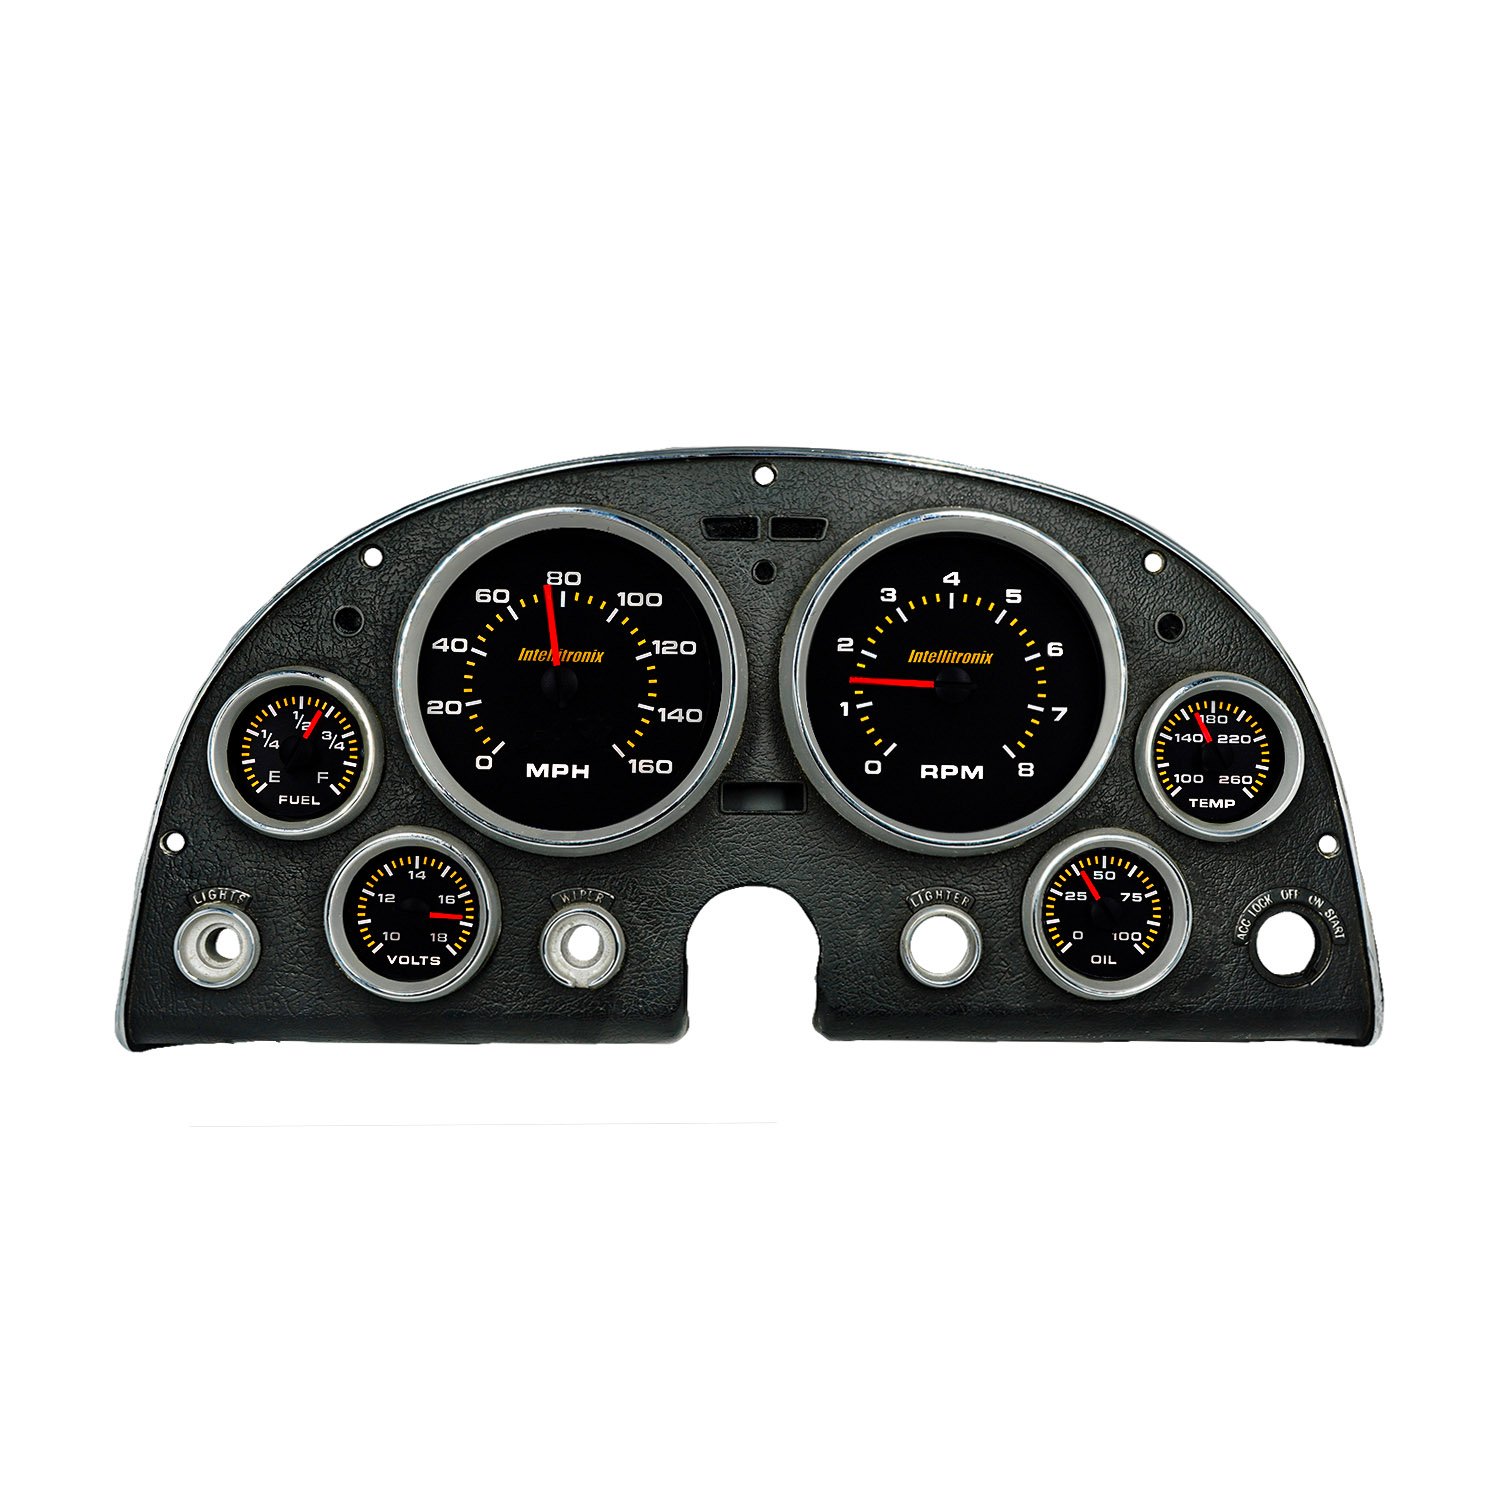 Direct-Fit Analog Dash Panel for 1963-1967 Chevy Corvette